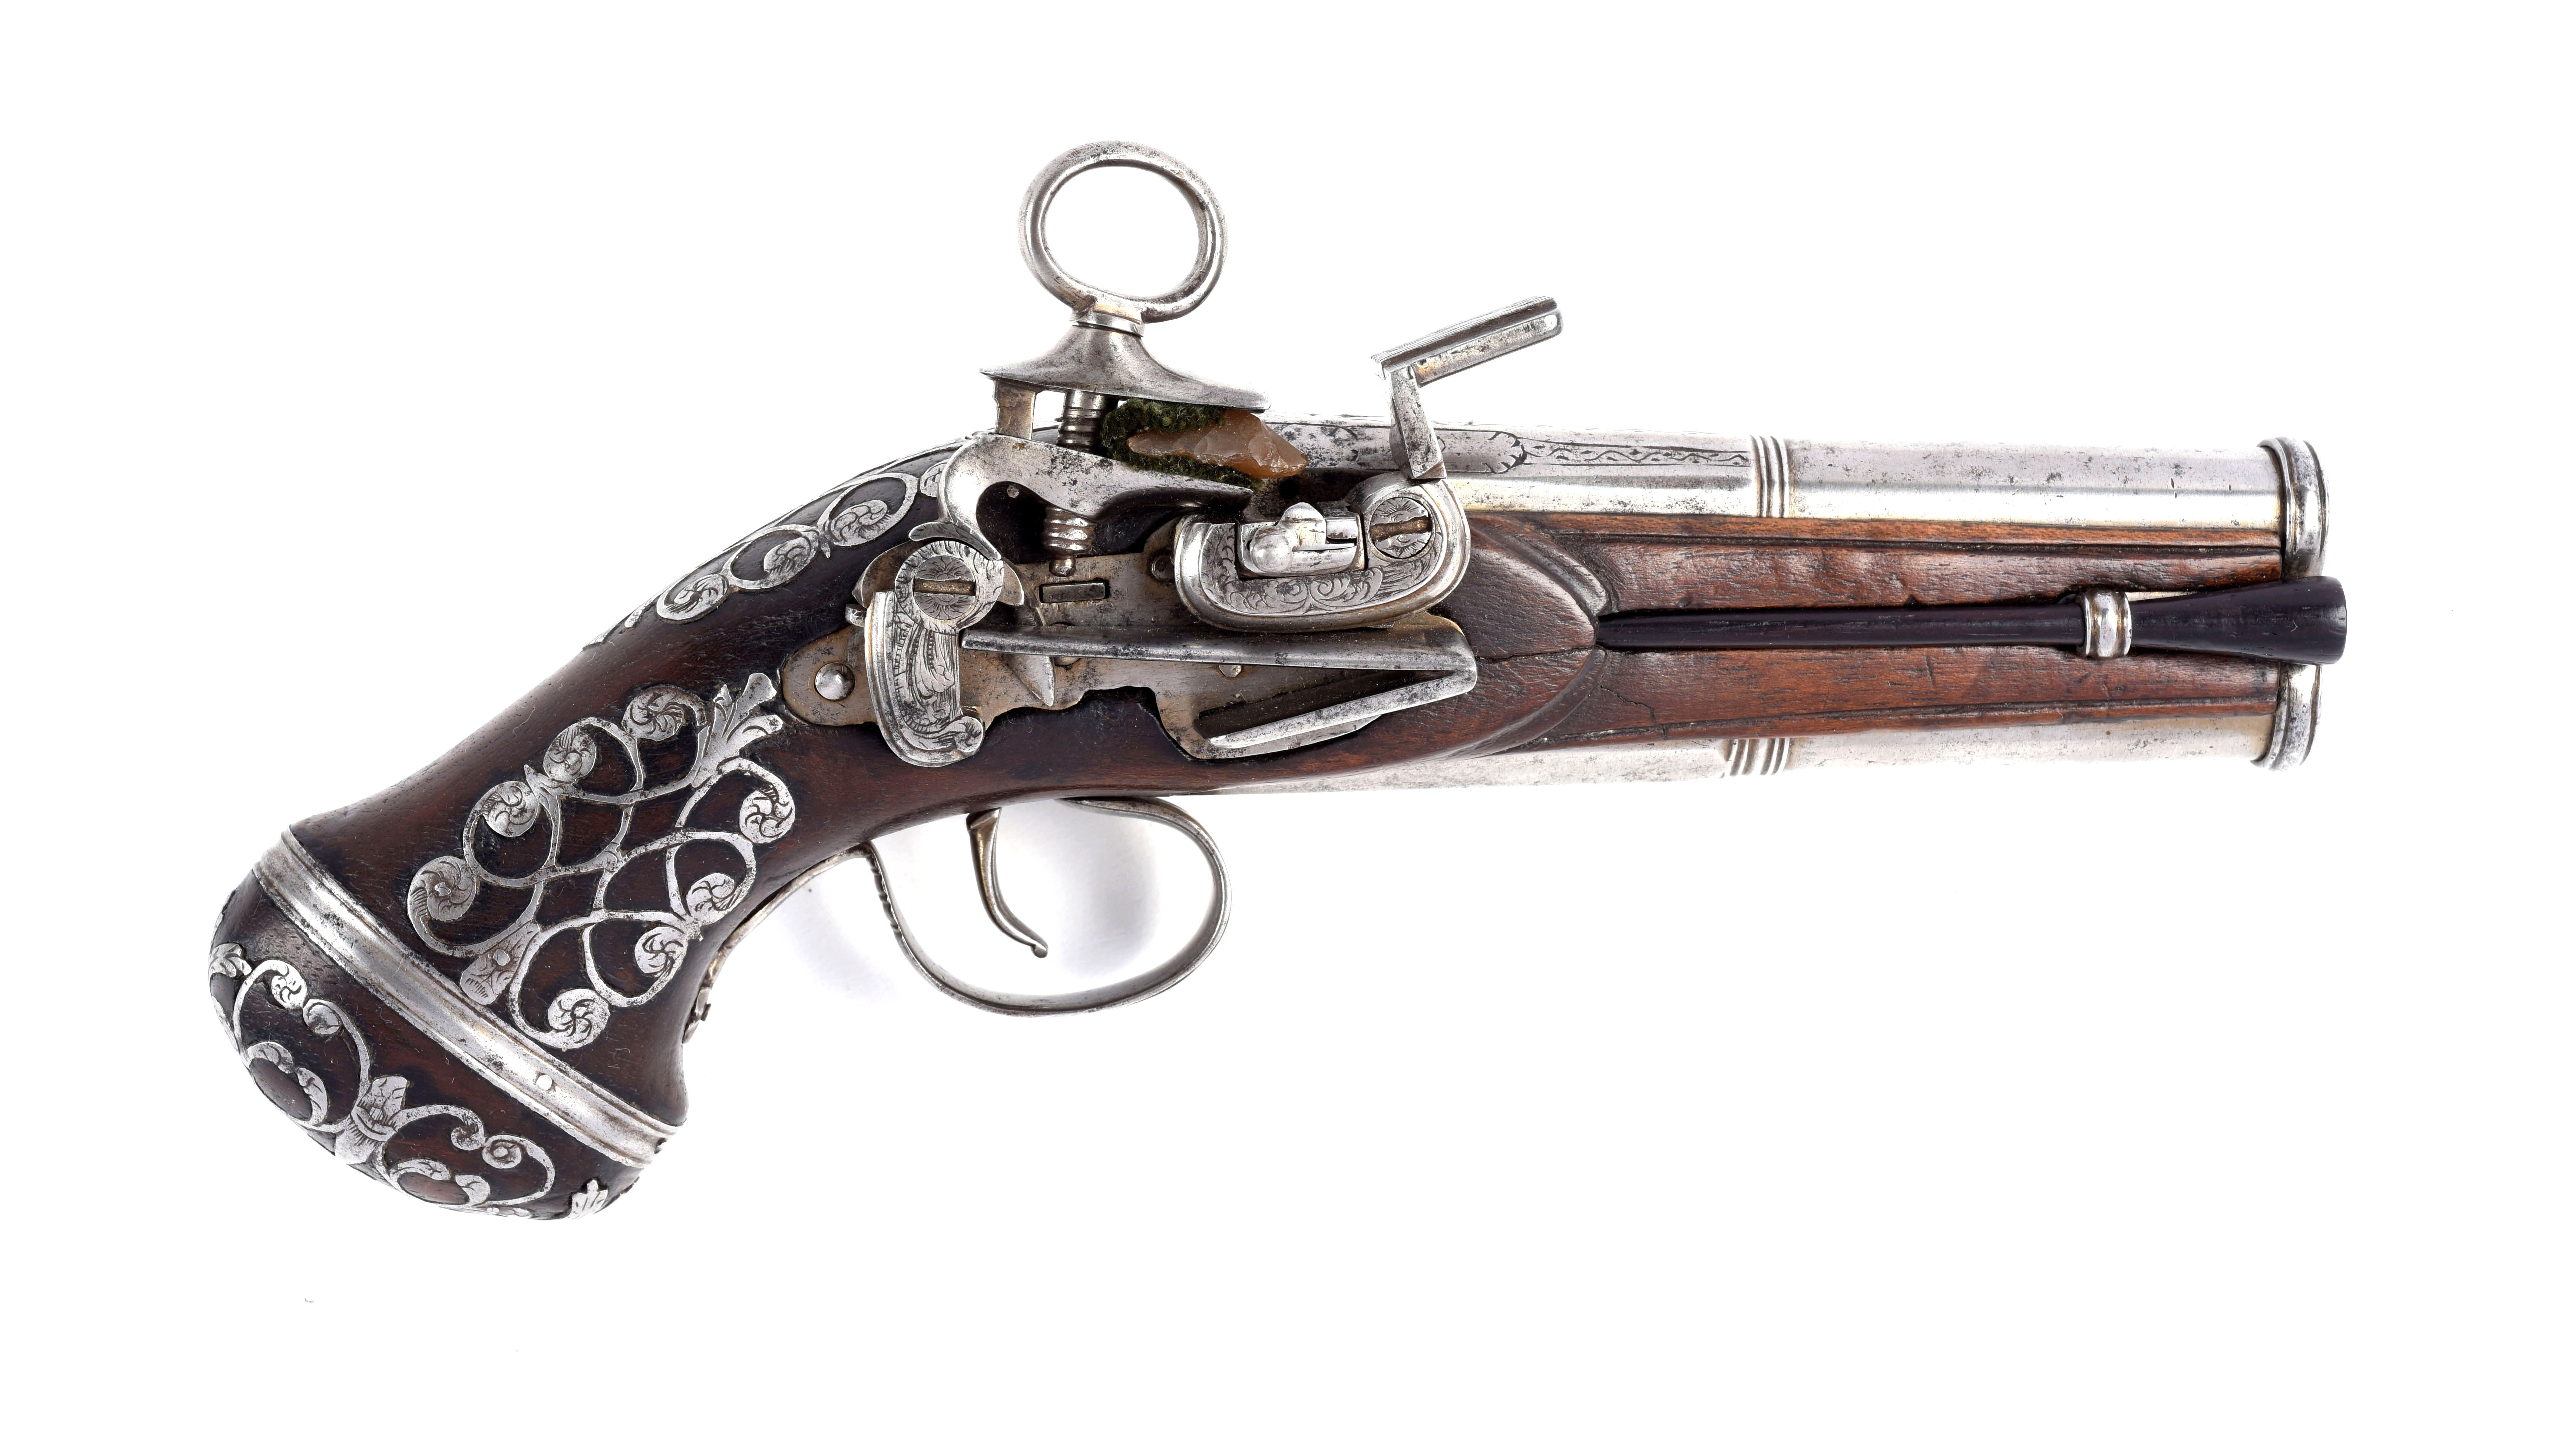 Scarce Spanish Double Barrel Superposed Ripoll Miquelet Pistol, estimated at $10,000-15,000.